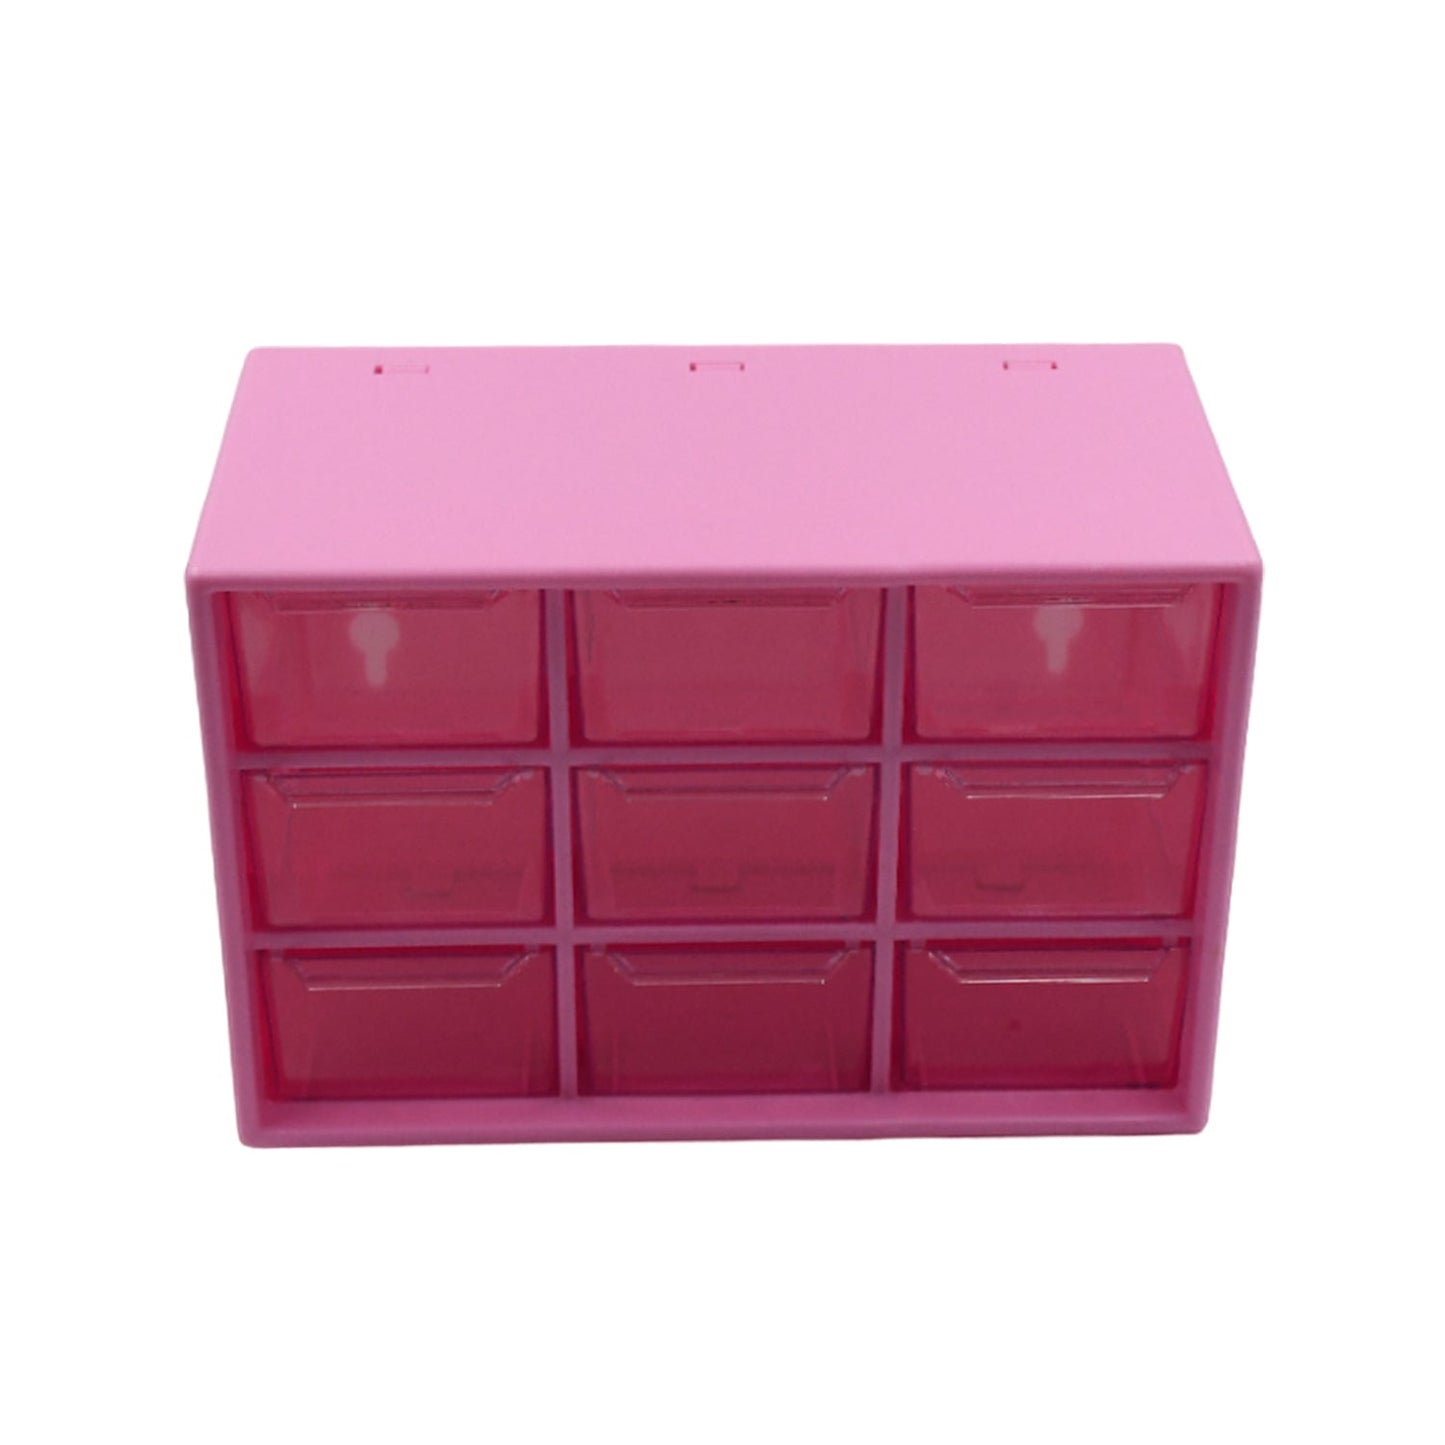 7997 Storage Box 9 Grids Multi-purpose Durable Desktop Drawer Organizer for Pencils Storage Holder Hanging Hole Design for Small Items